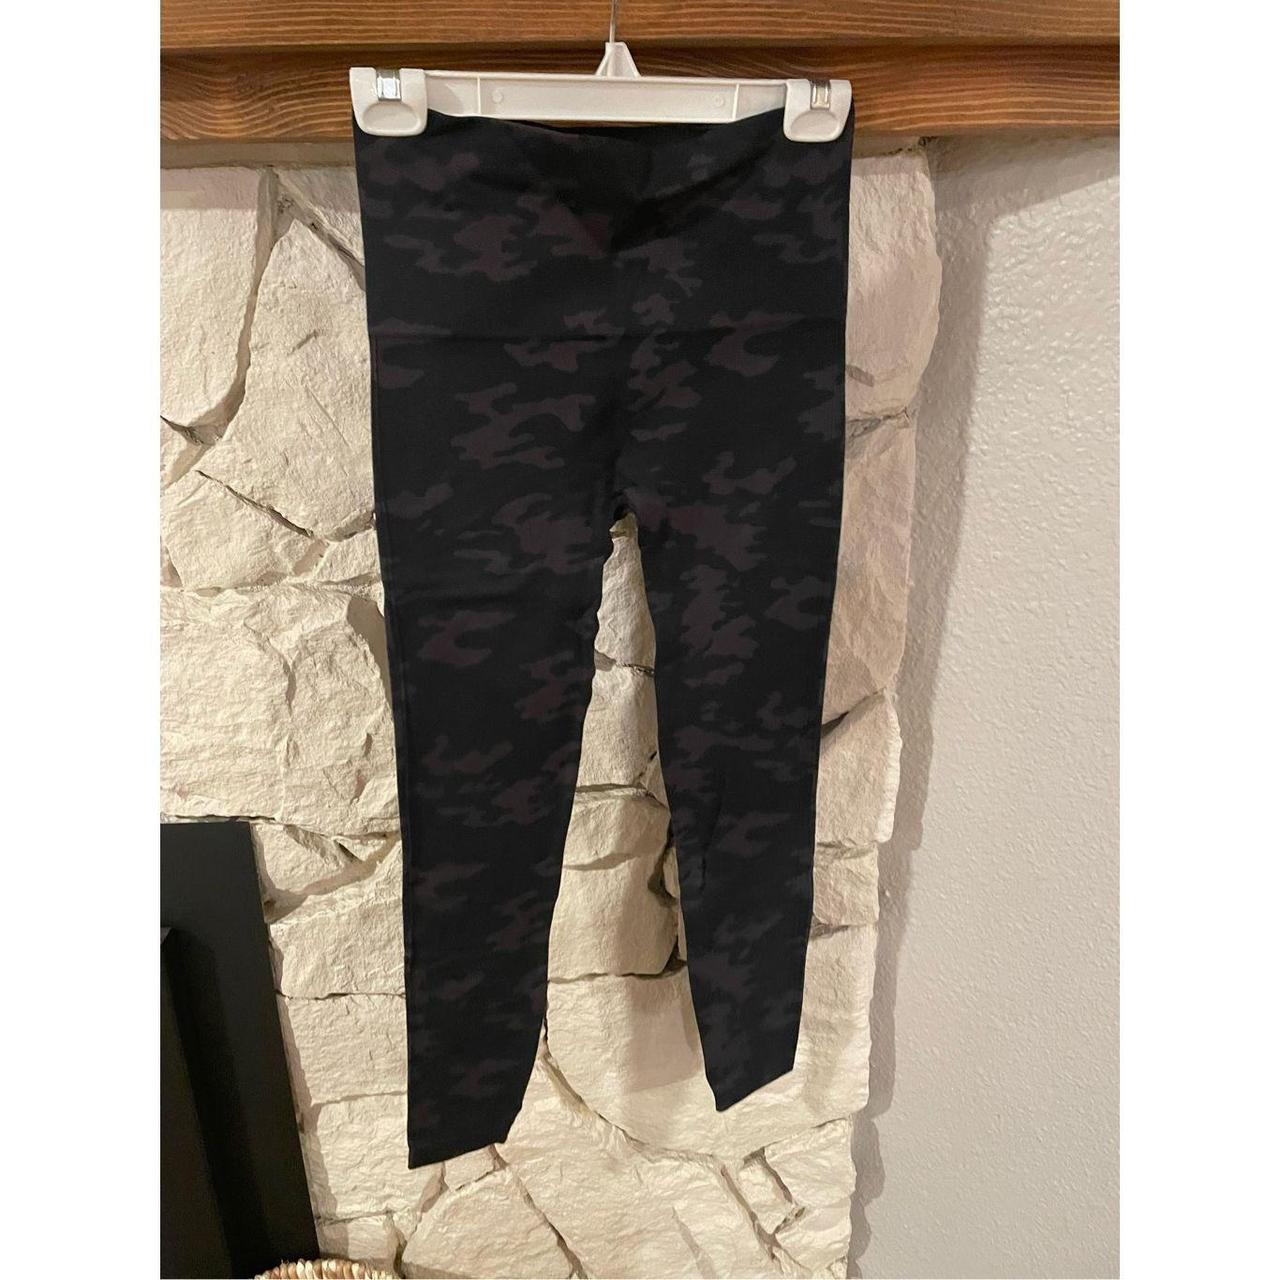 Spanx look and me now leggings black camo seamless